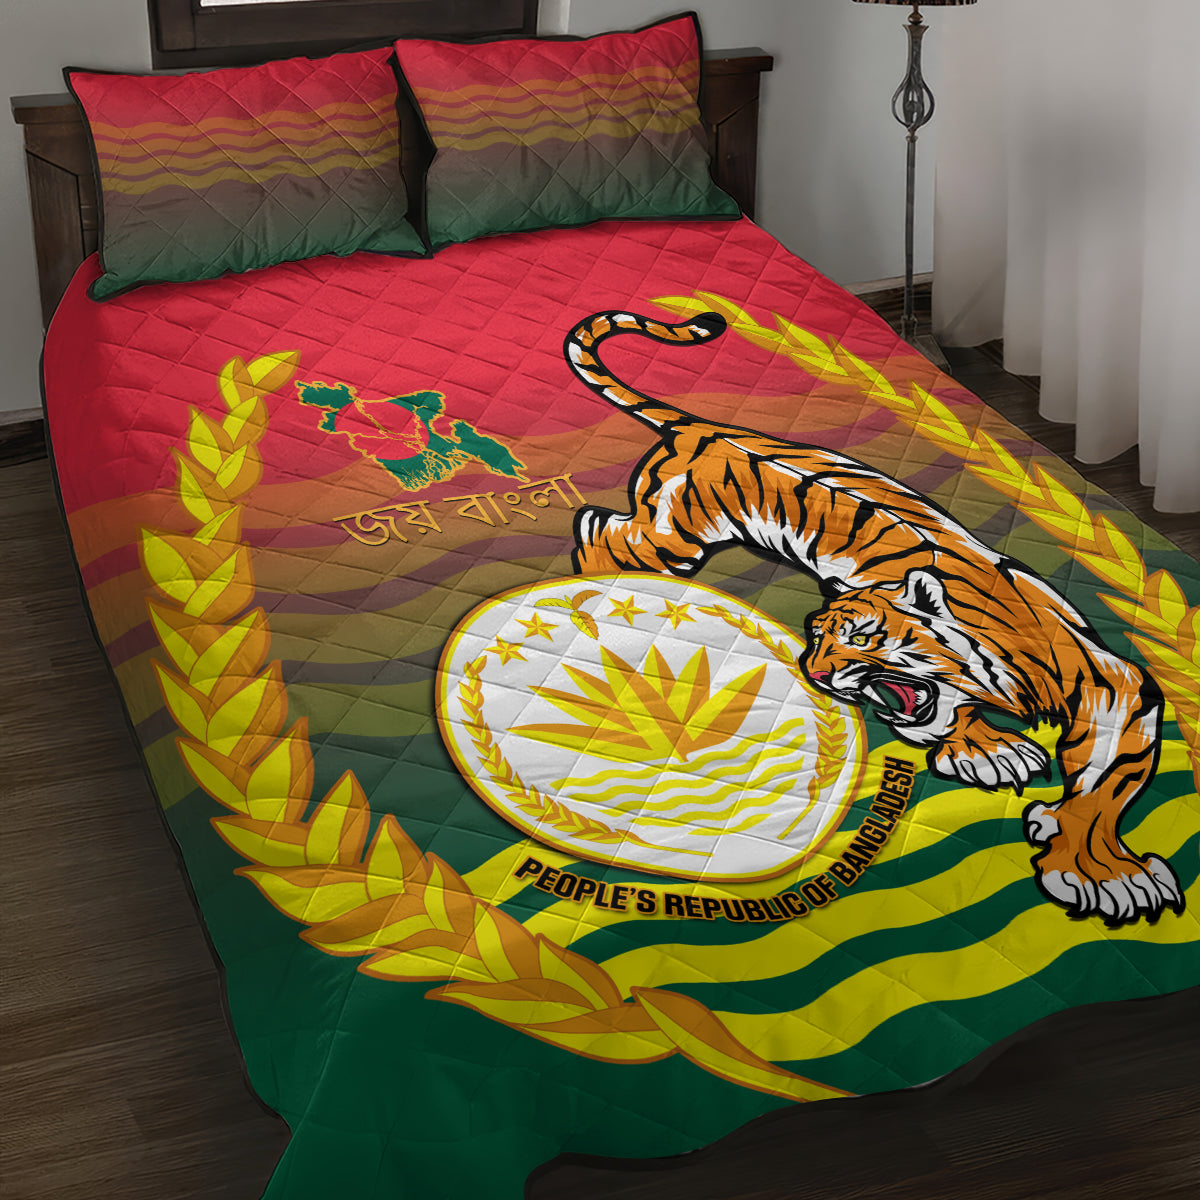 Bangladesh Independence Day Quilt Bed Set Royal Bengal Tiger With Coat Of Arms